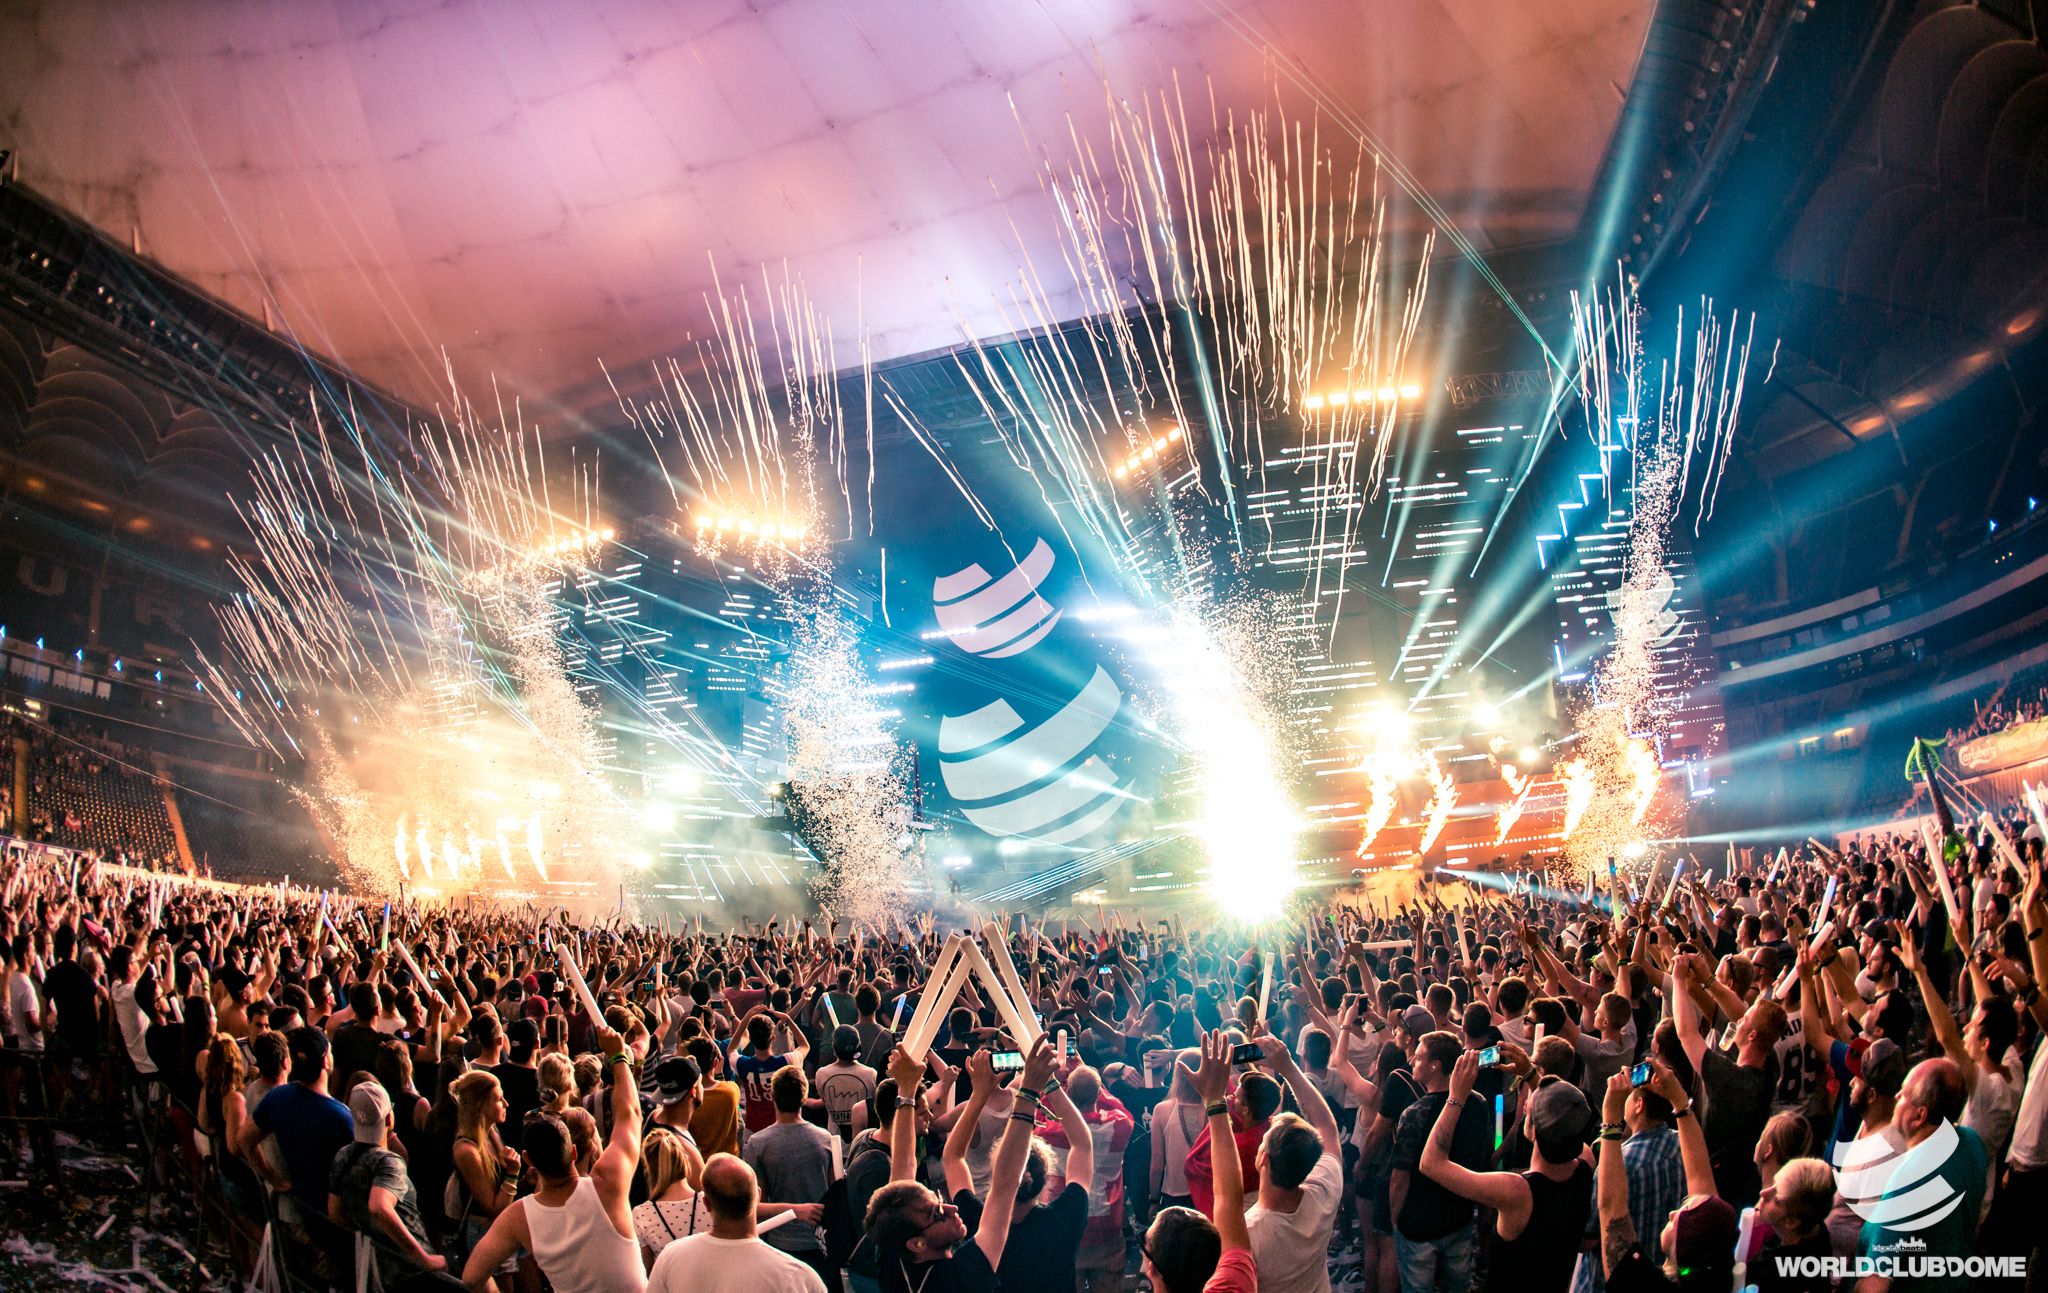 BIG CITY BEATS WORLD CLUB DOME FESTIVAL COMPLETES 2022 ALL STAR LINE-UP - Netherlands